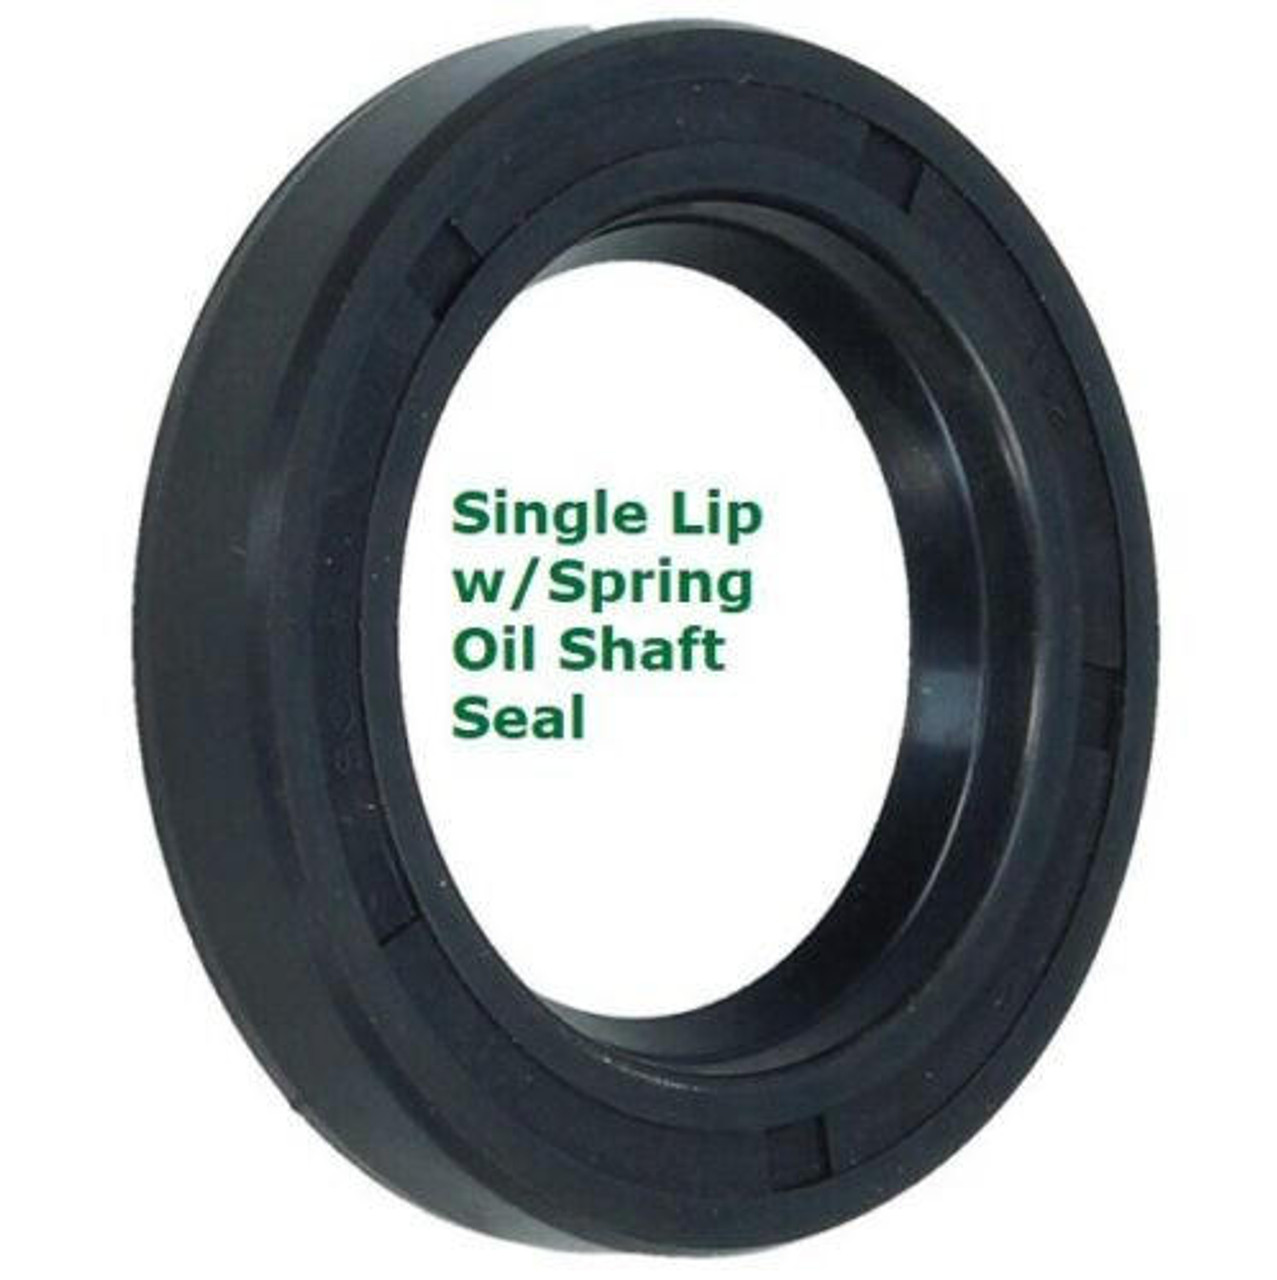 Metric Oil Shaft Seal 40 x 55 x 7mm Single Lip  Ref# CR565254or CR692465 Price for 1 pc